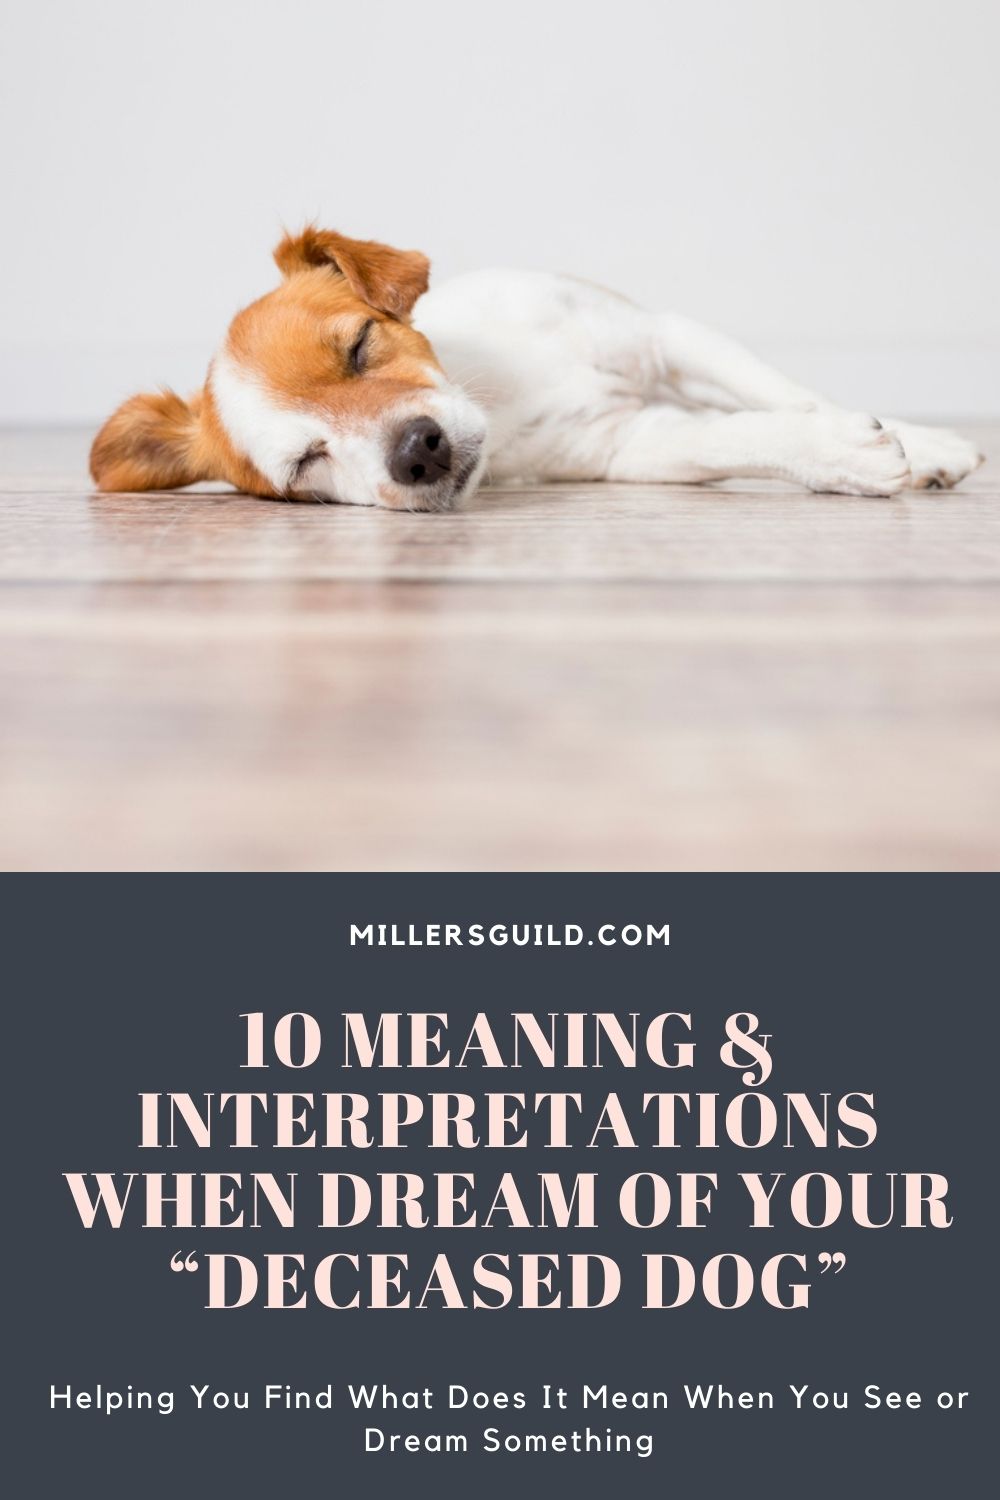 10 Meaning & Interpretations When Dream of Your “Deceased Dog” 2